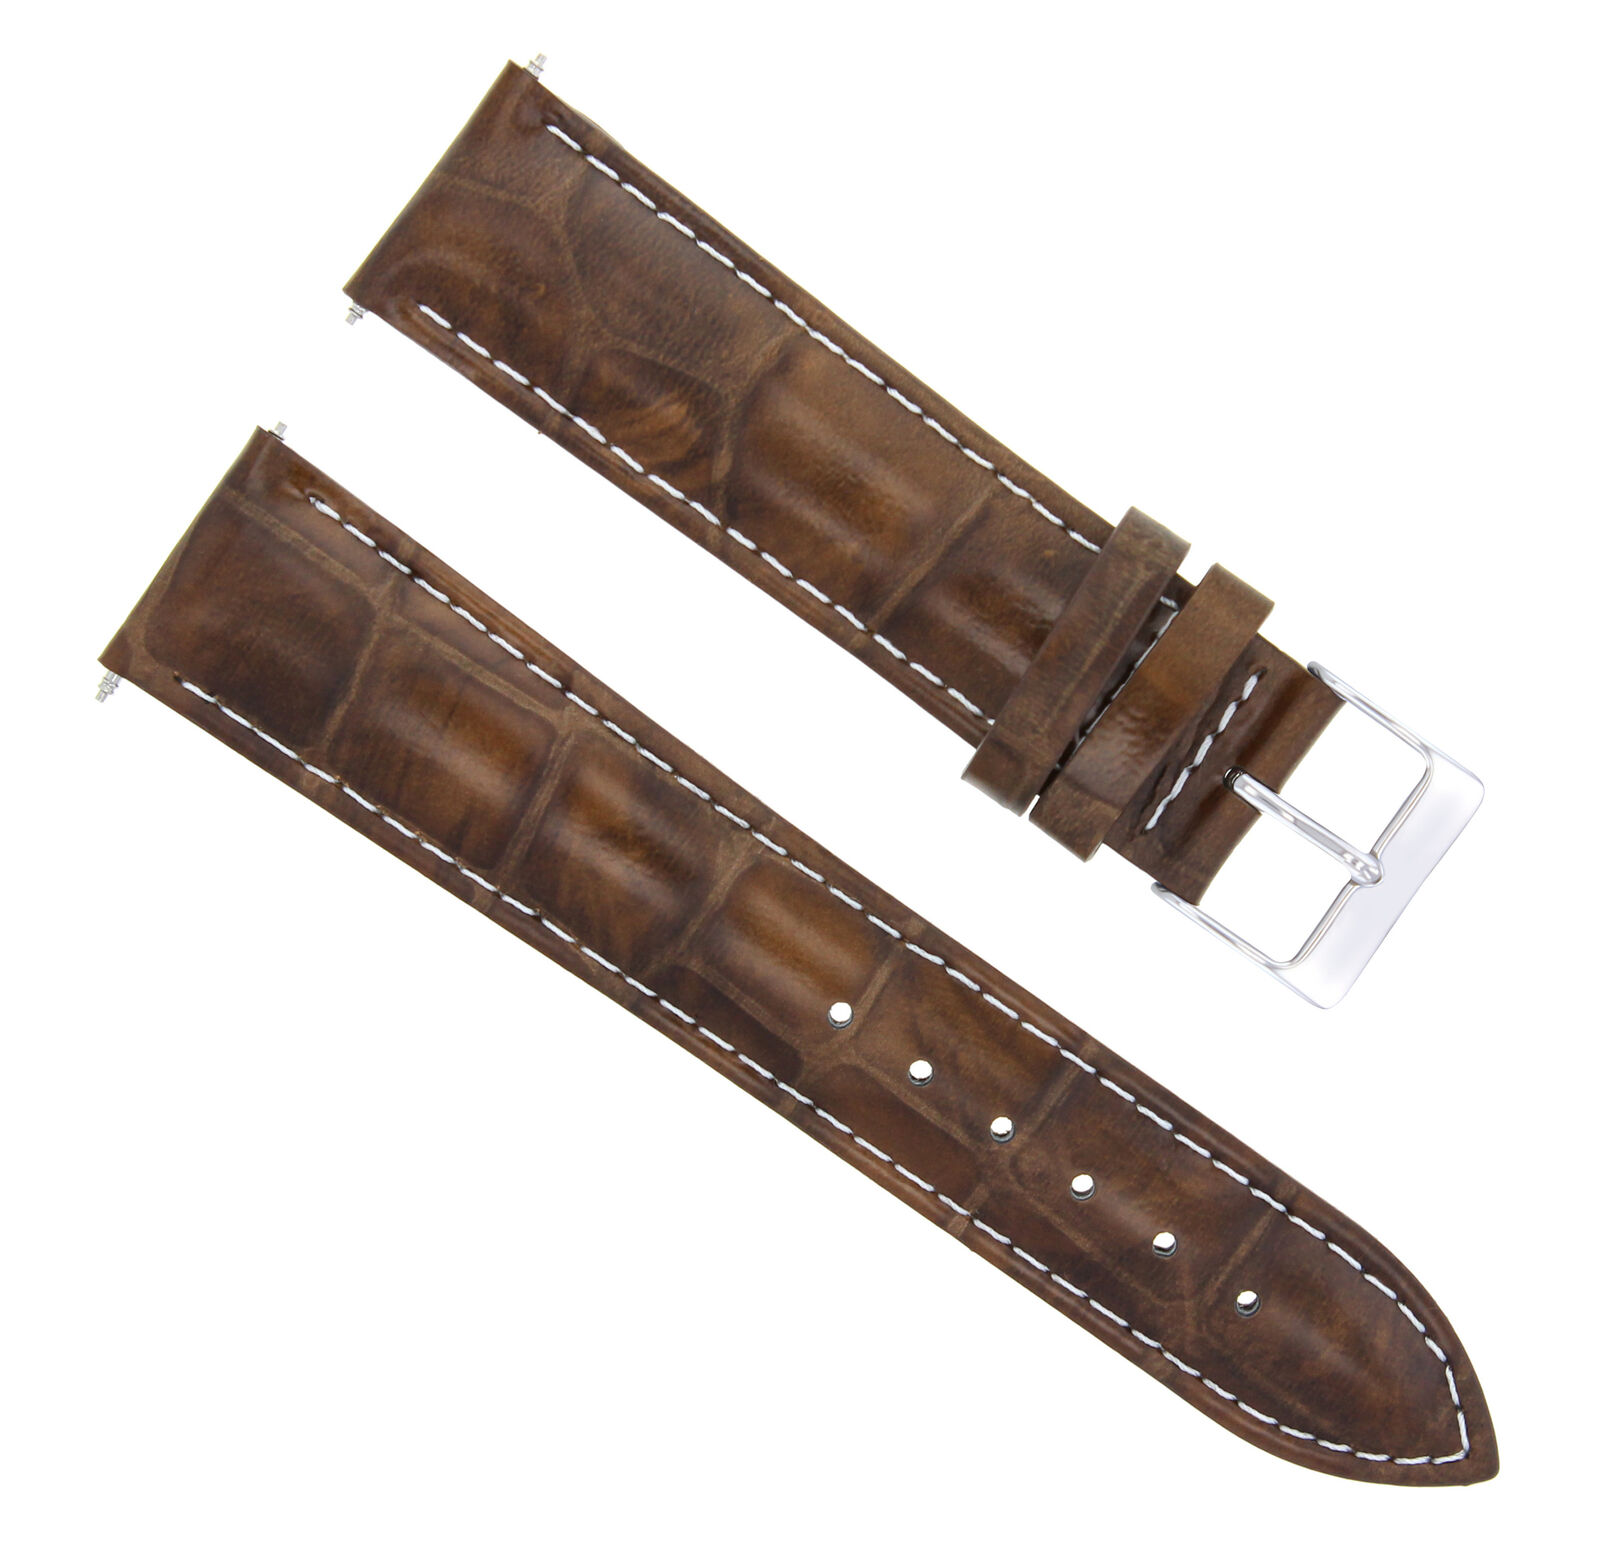 22MM LEATHER WATCH BAND STRAP FOR NAUTICAL WATCH LIGHT BROWN  WHITE STITCHING